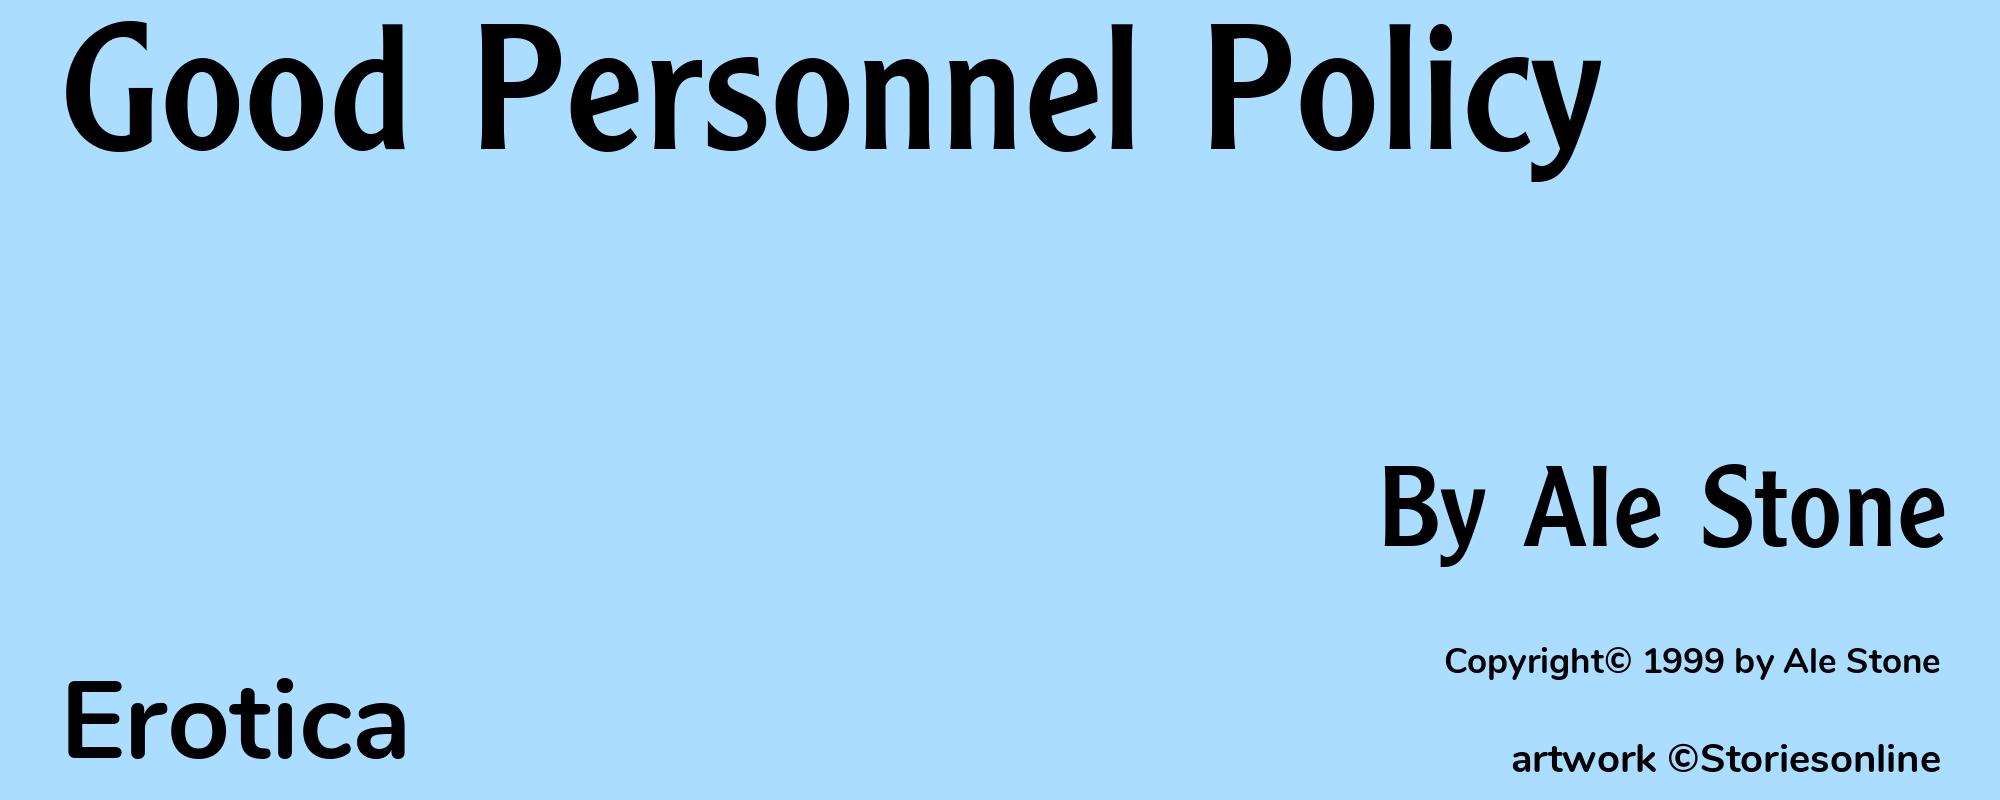 Good Personnel Policy - Cover